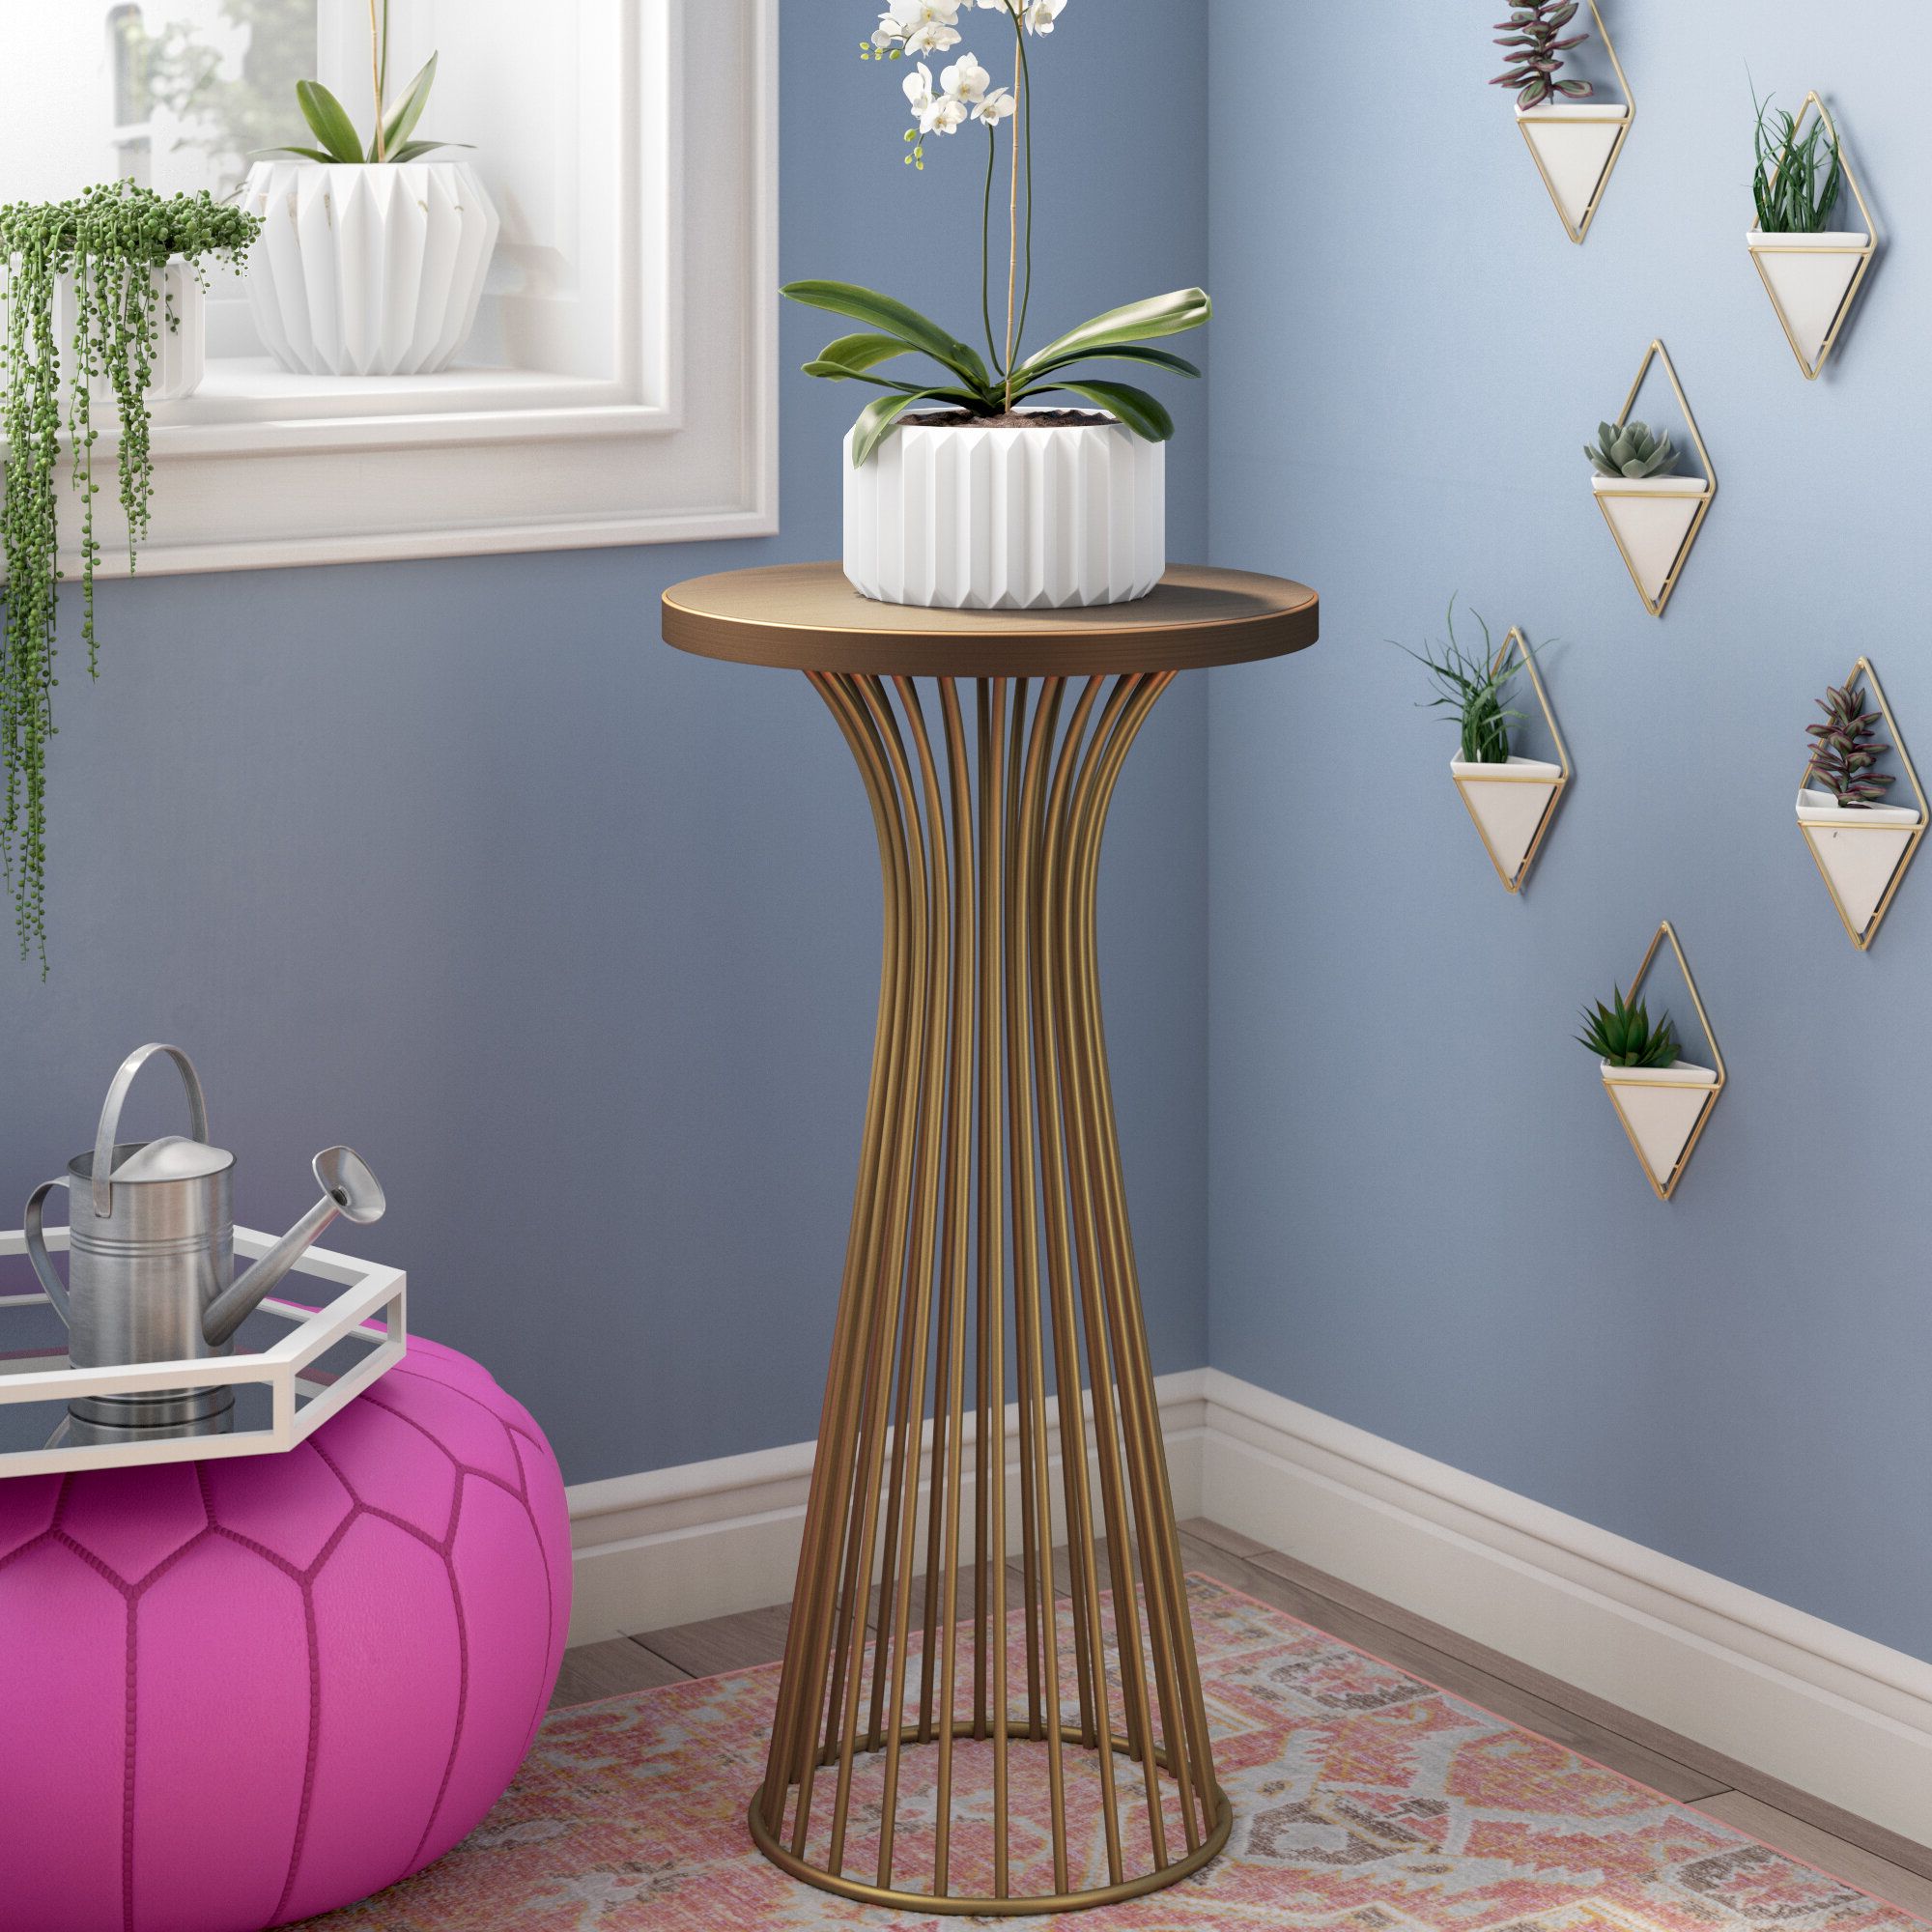 Most Current Pedestal Plant Stands In Wayfair (View 7 of 15)